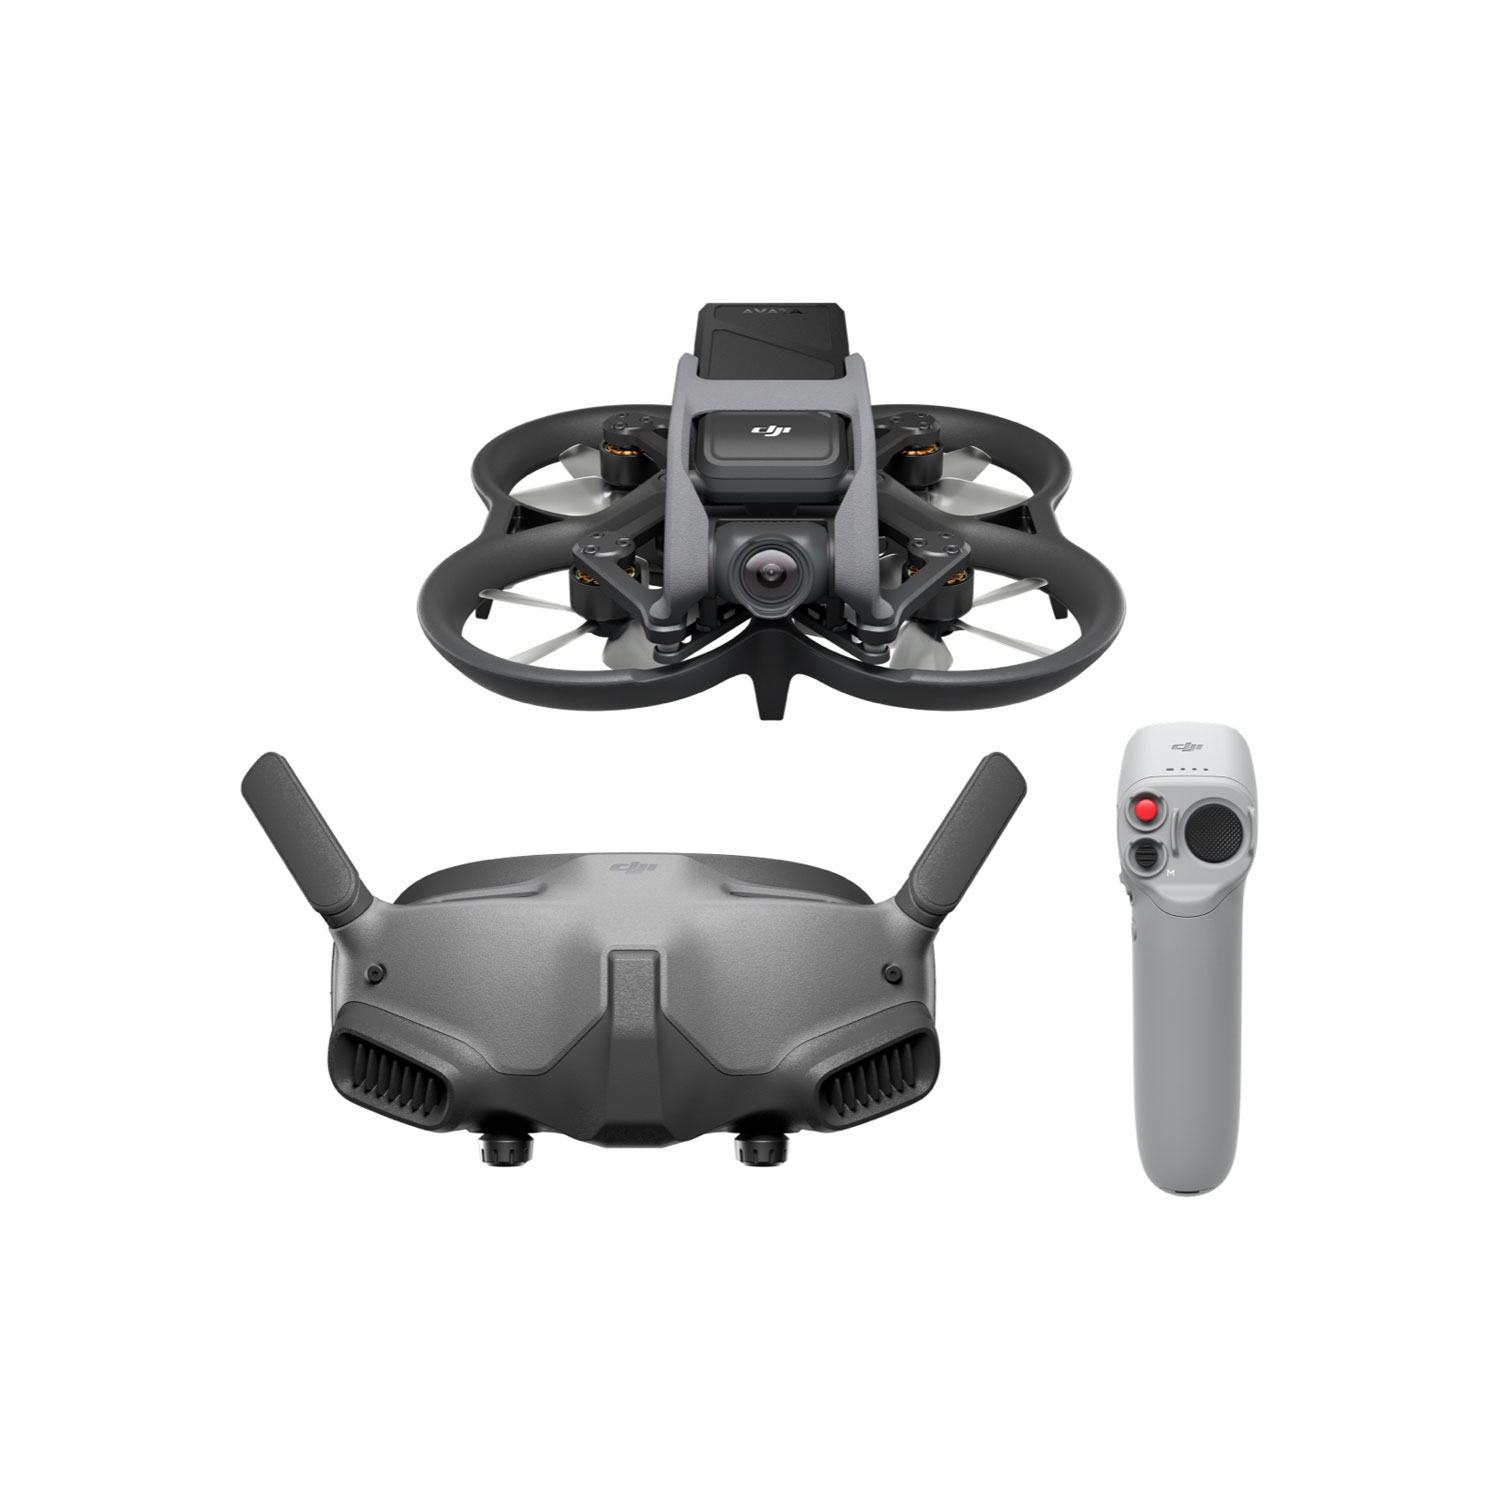 DJI Avata Quadcopter Drone Pro-View Combo with Motion Controller & Goggles 2 - Grey